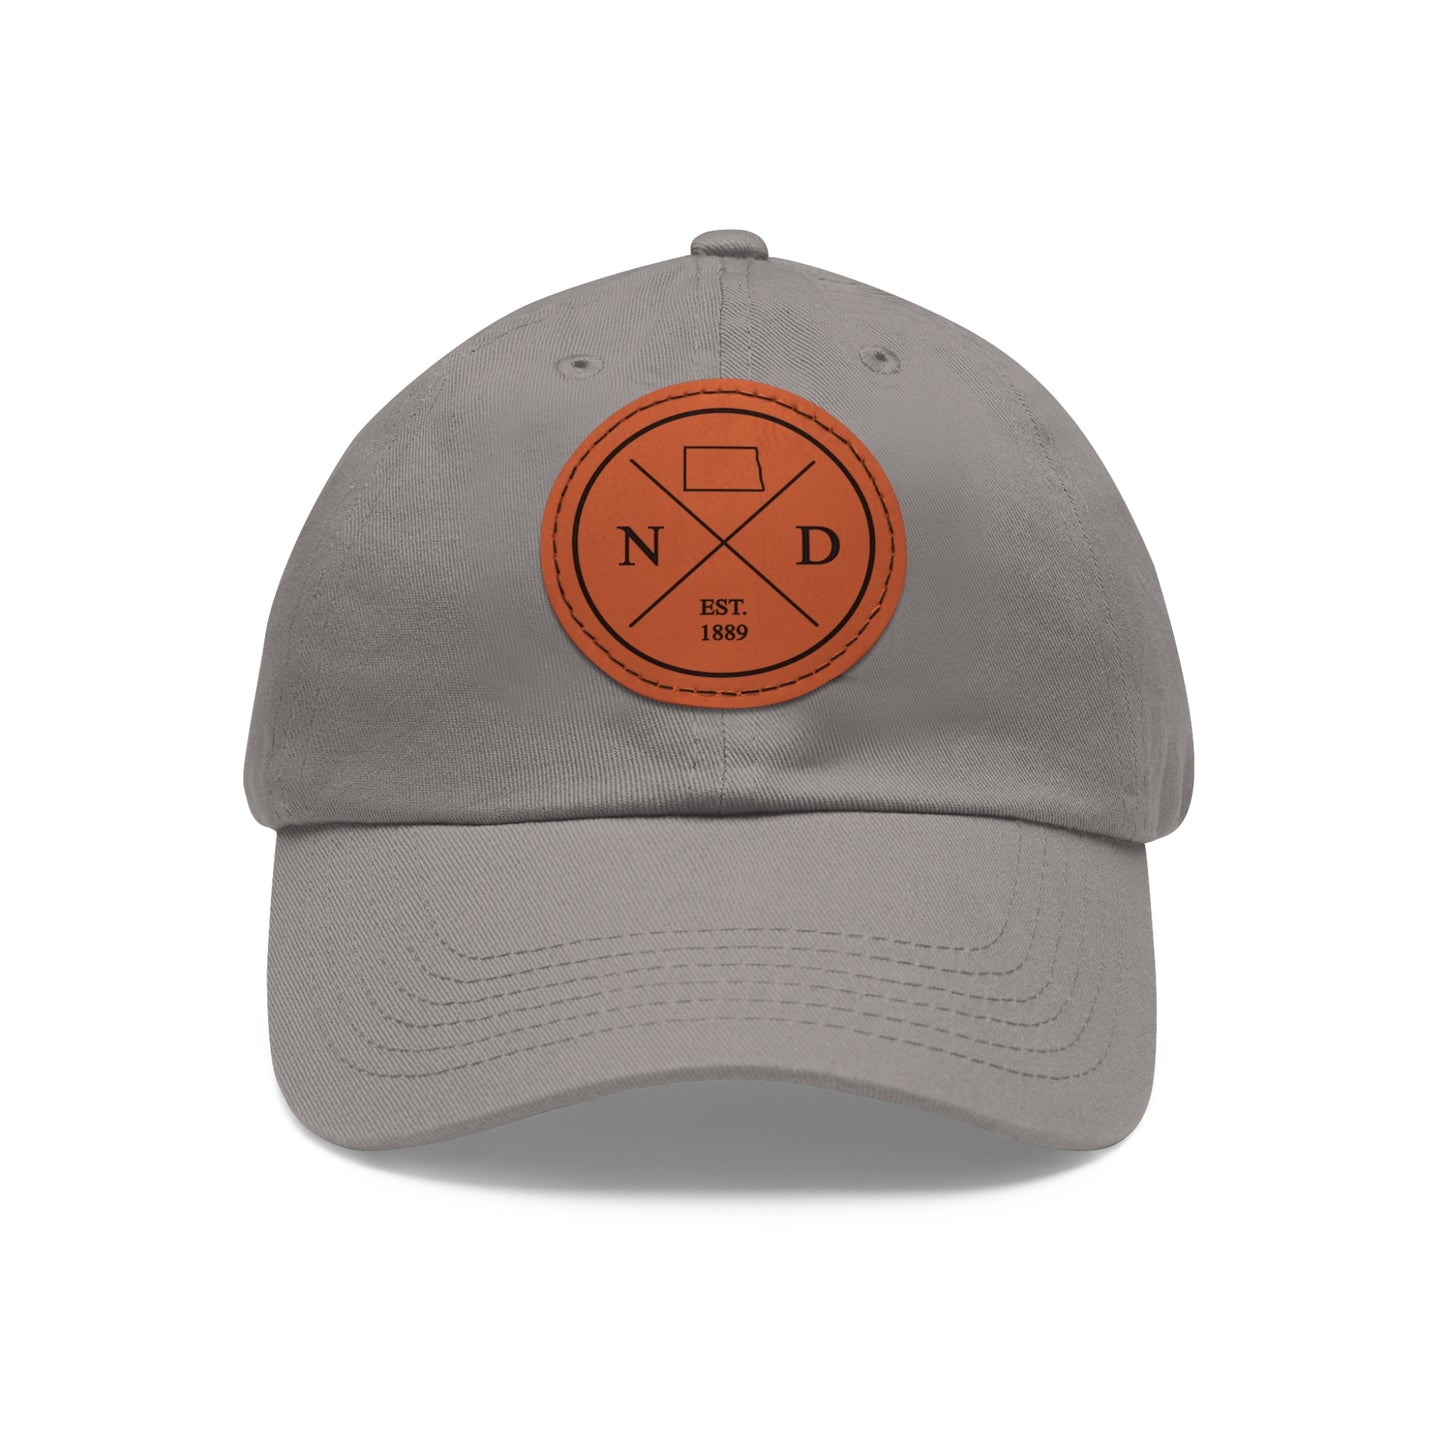 North Dakota Dad Hat with Leather Patch